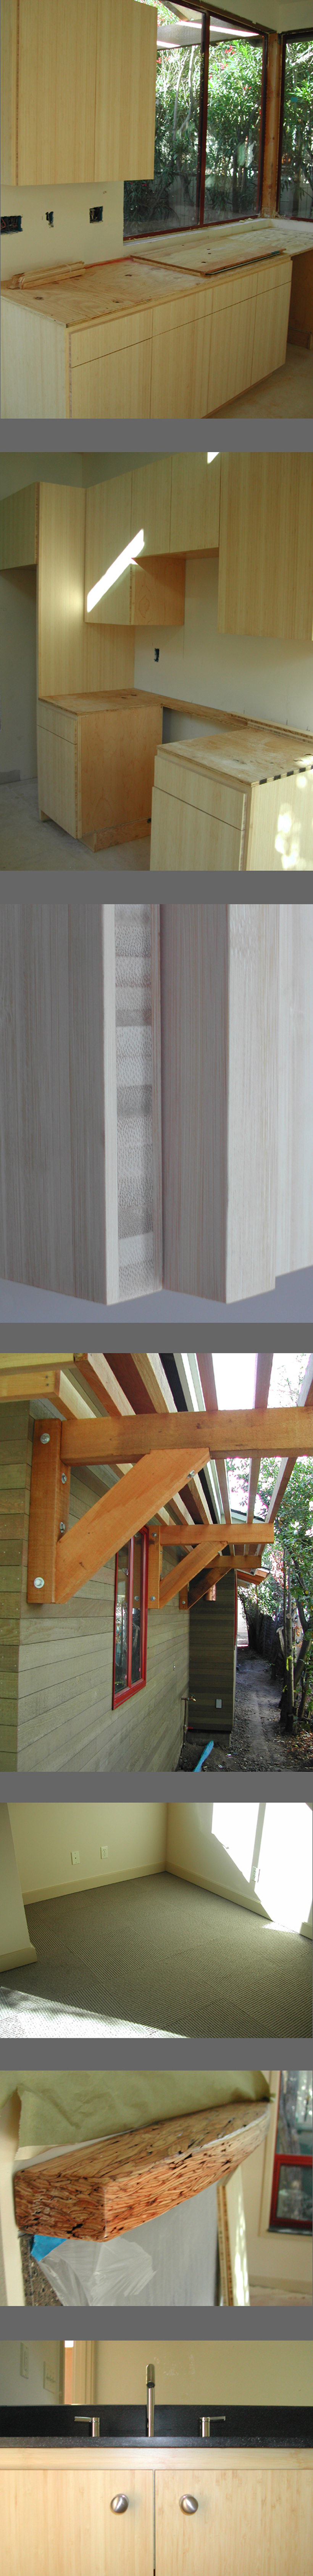 Faculty House, ENR architects with Topos Architects, Palo Alto, CA 94306 - Millwork-Finishes